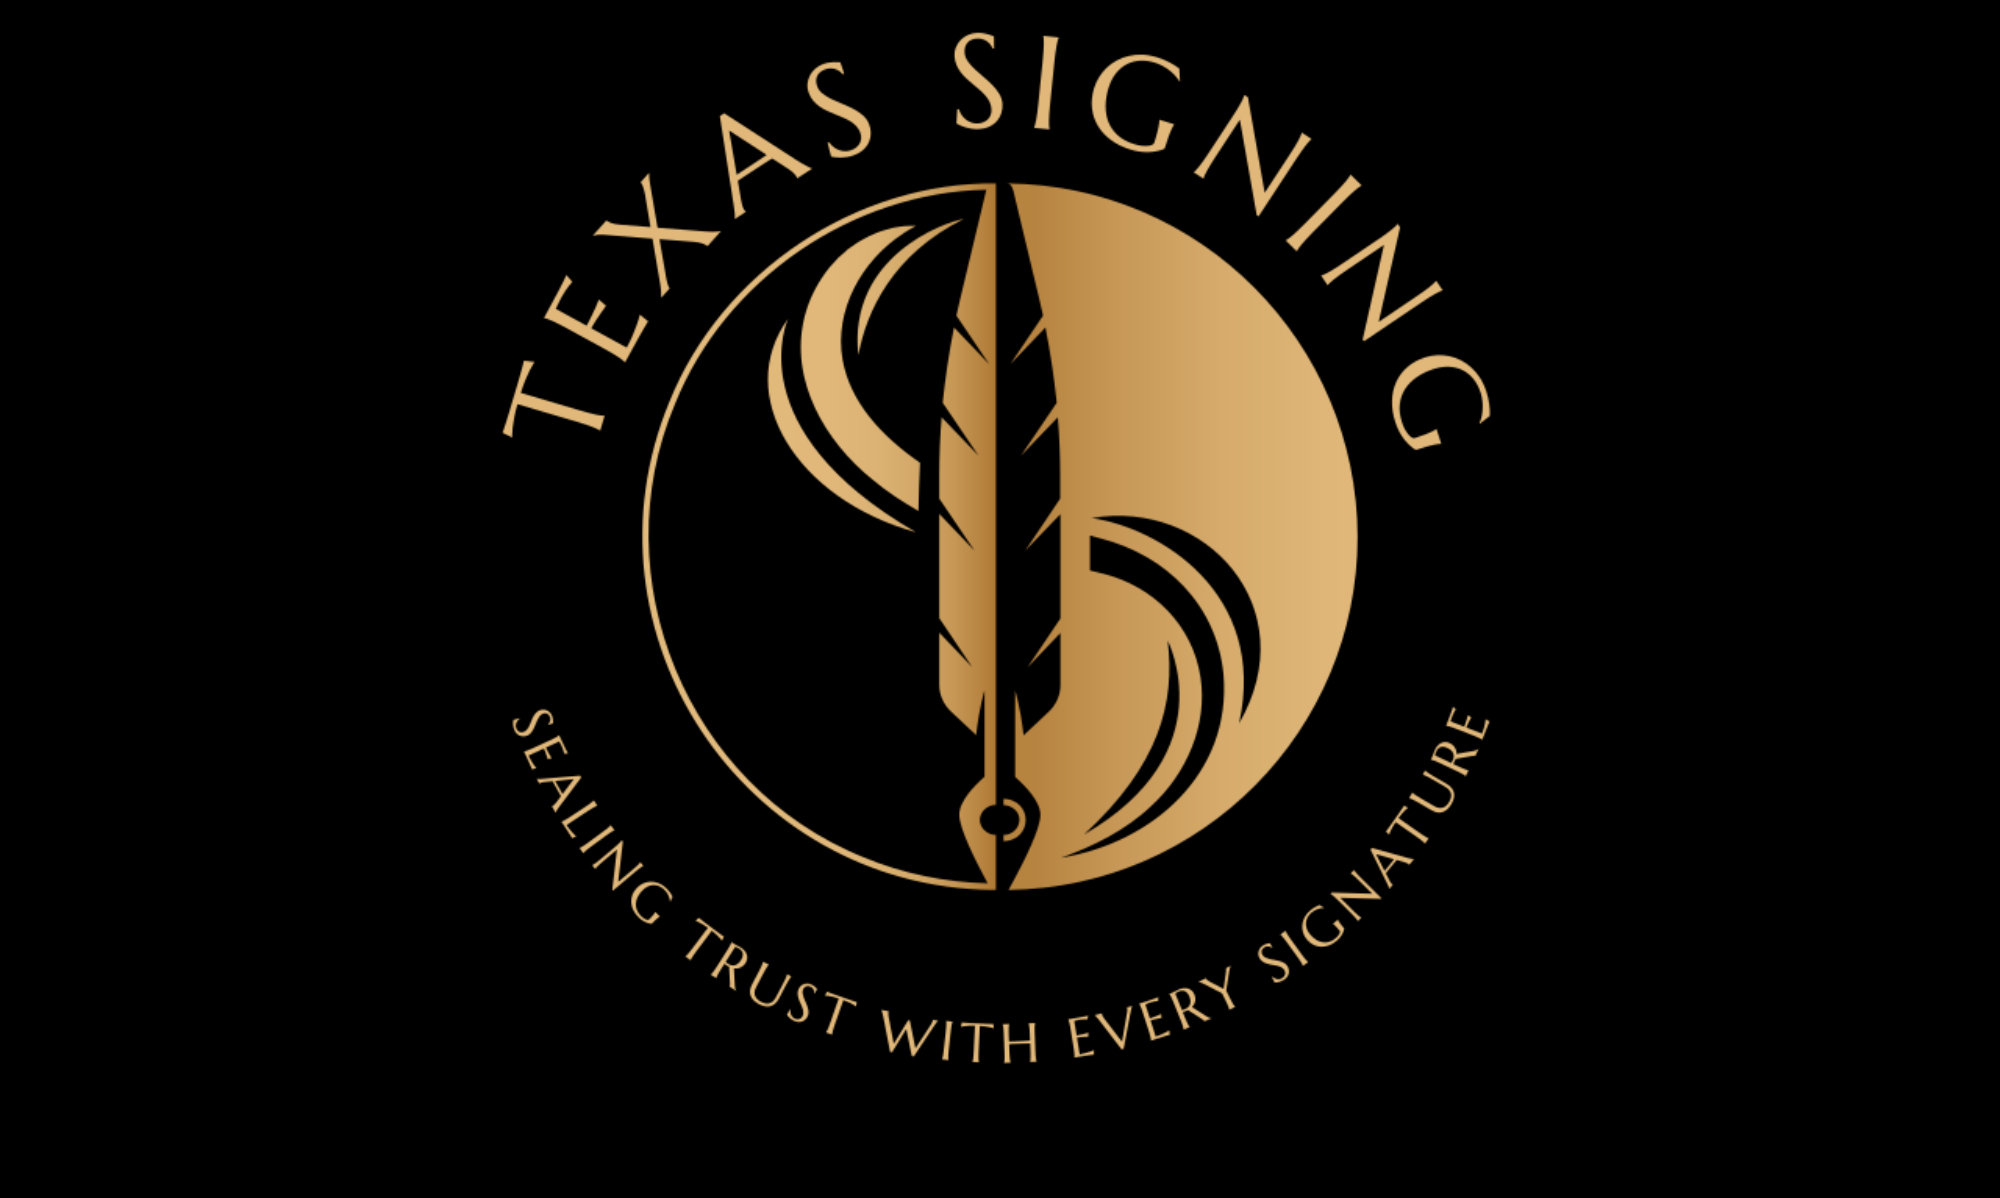 Texas Signing Agent and Public Notary, Corinth Texas Sealing Trust with Every Signature